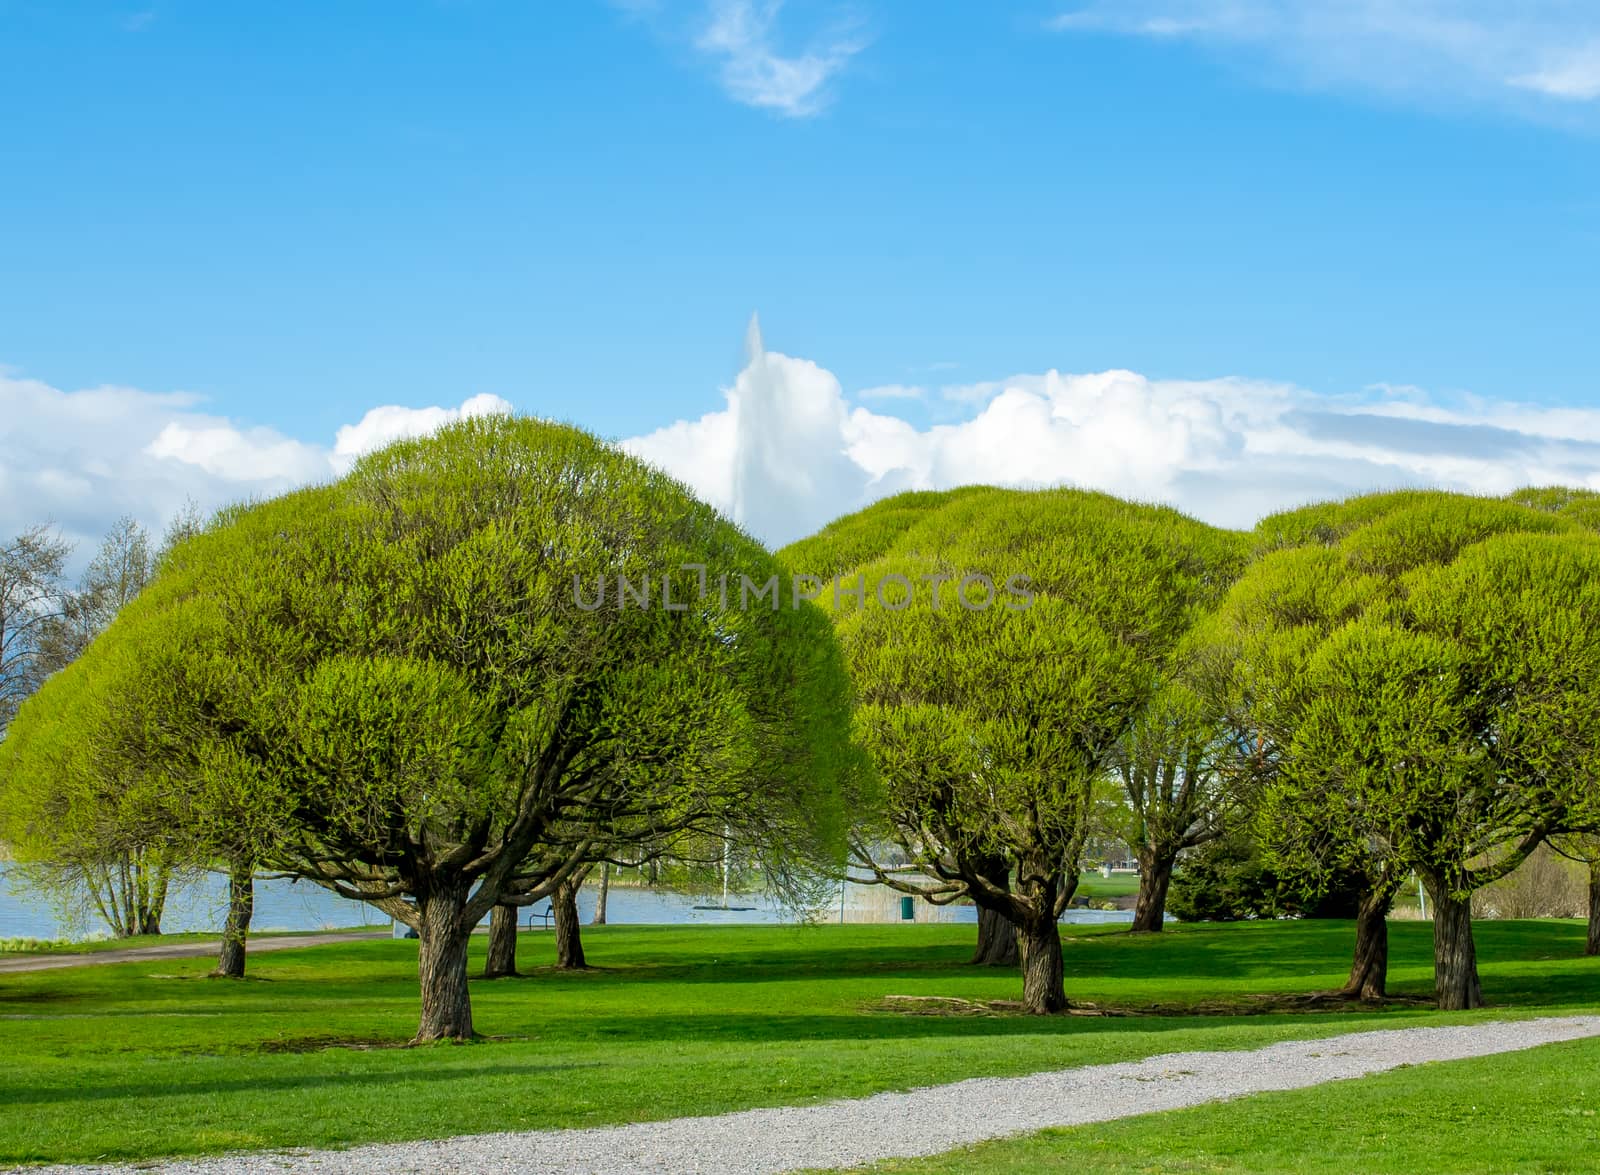 Beautiful lush park view against the blue sky